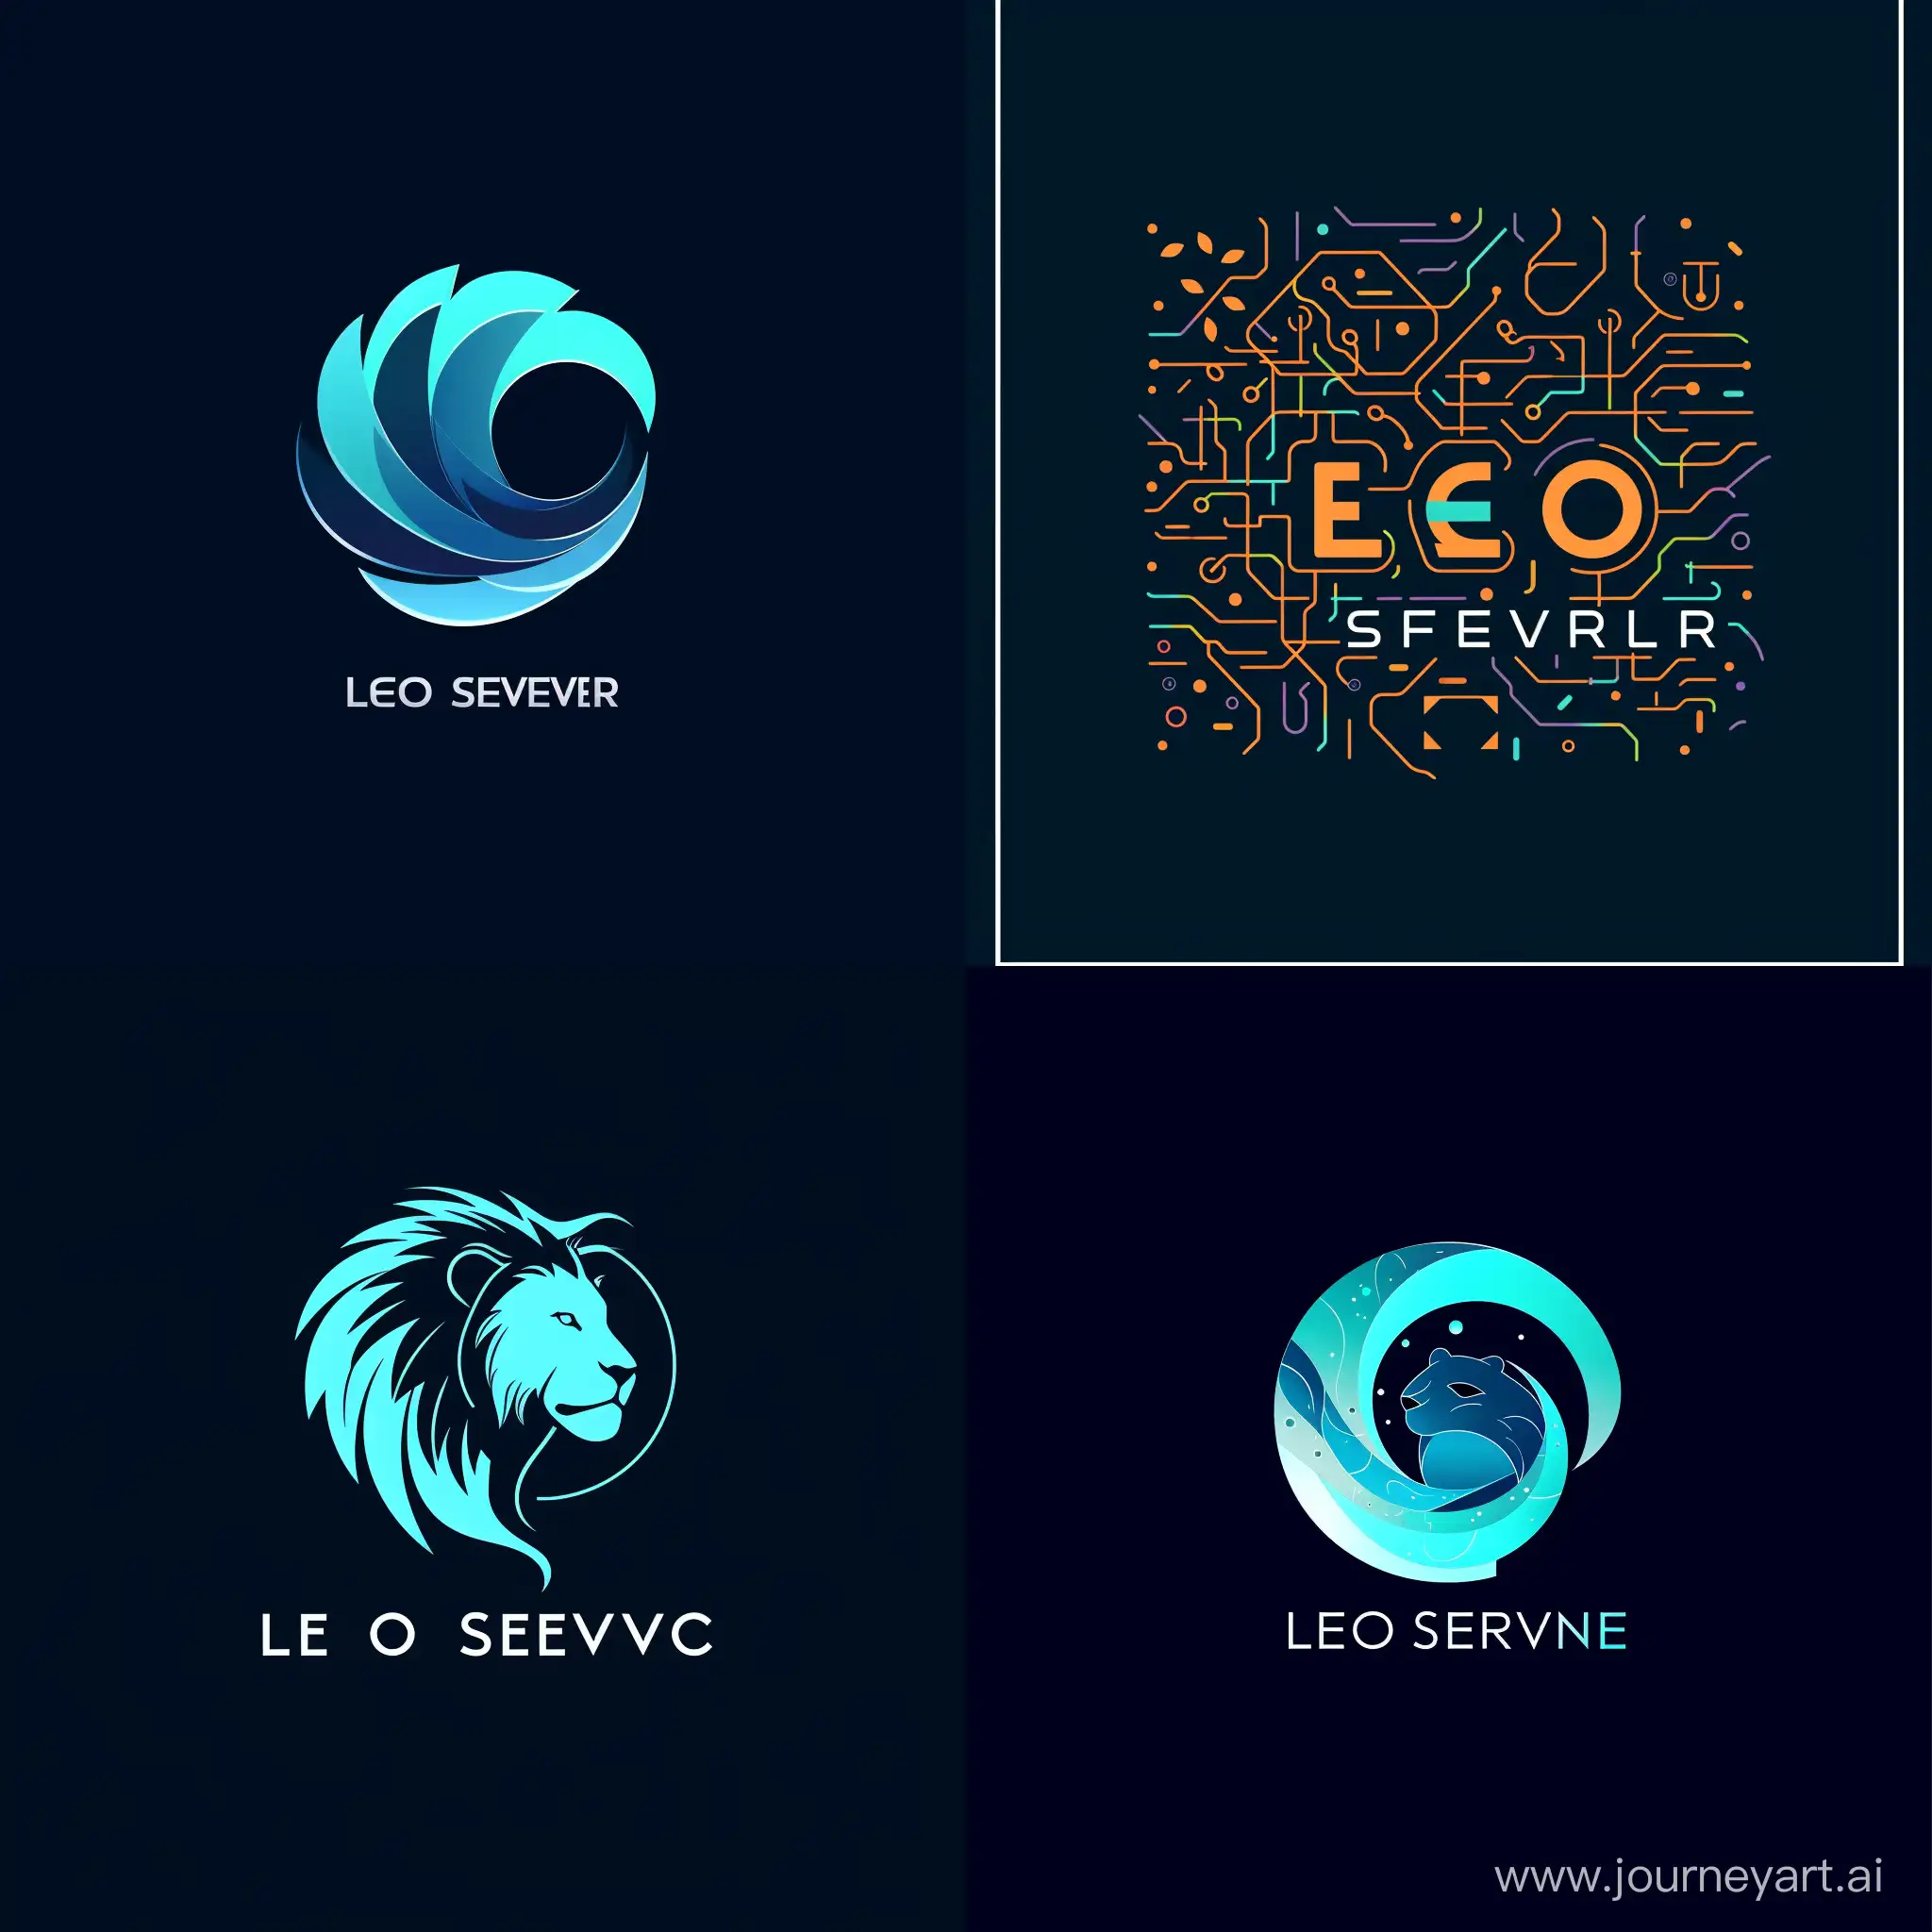 A vector graphic logo for a technology and biomedical company: Leo Service